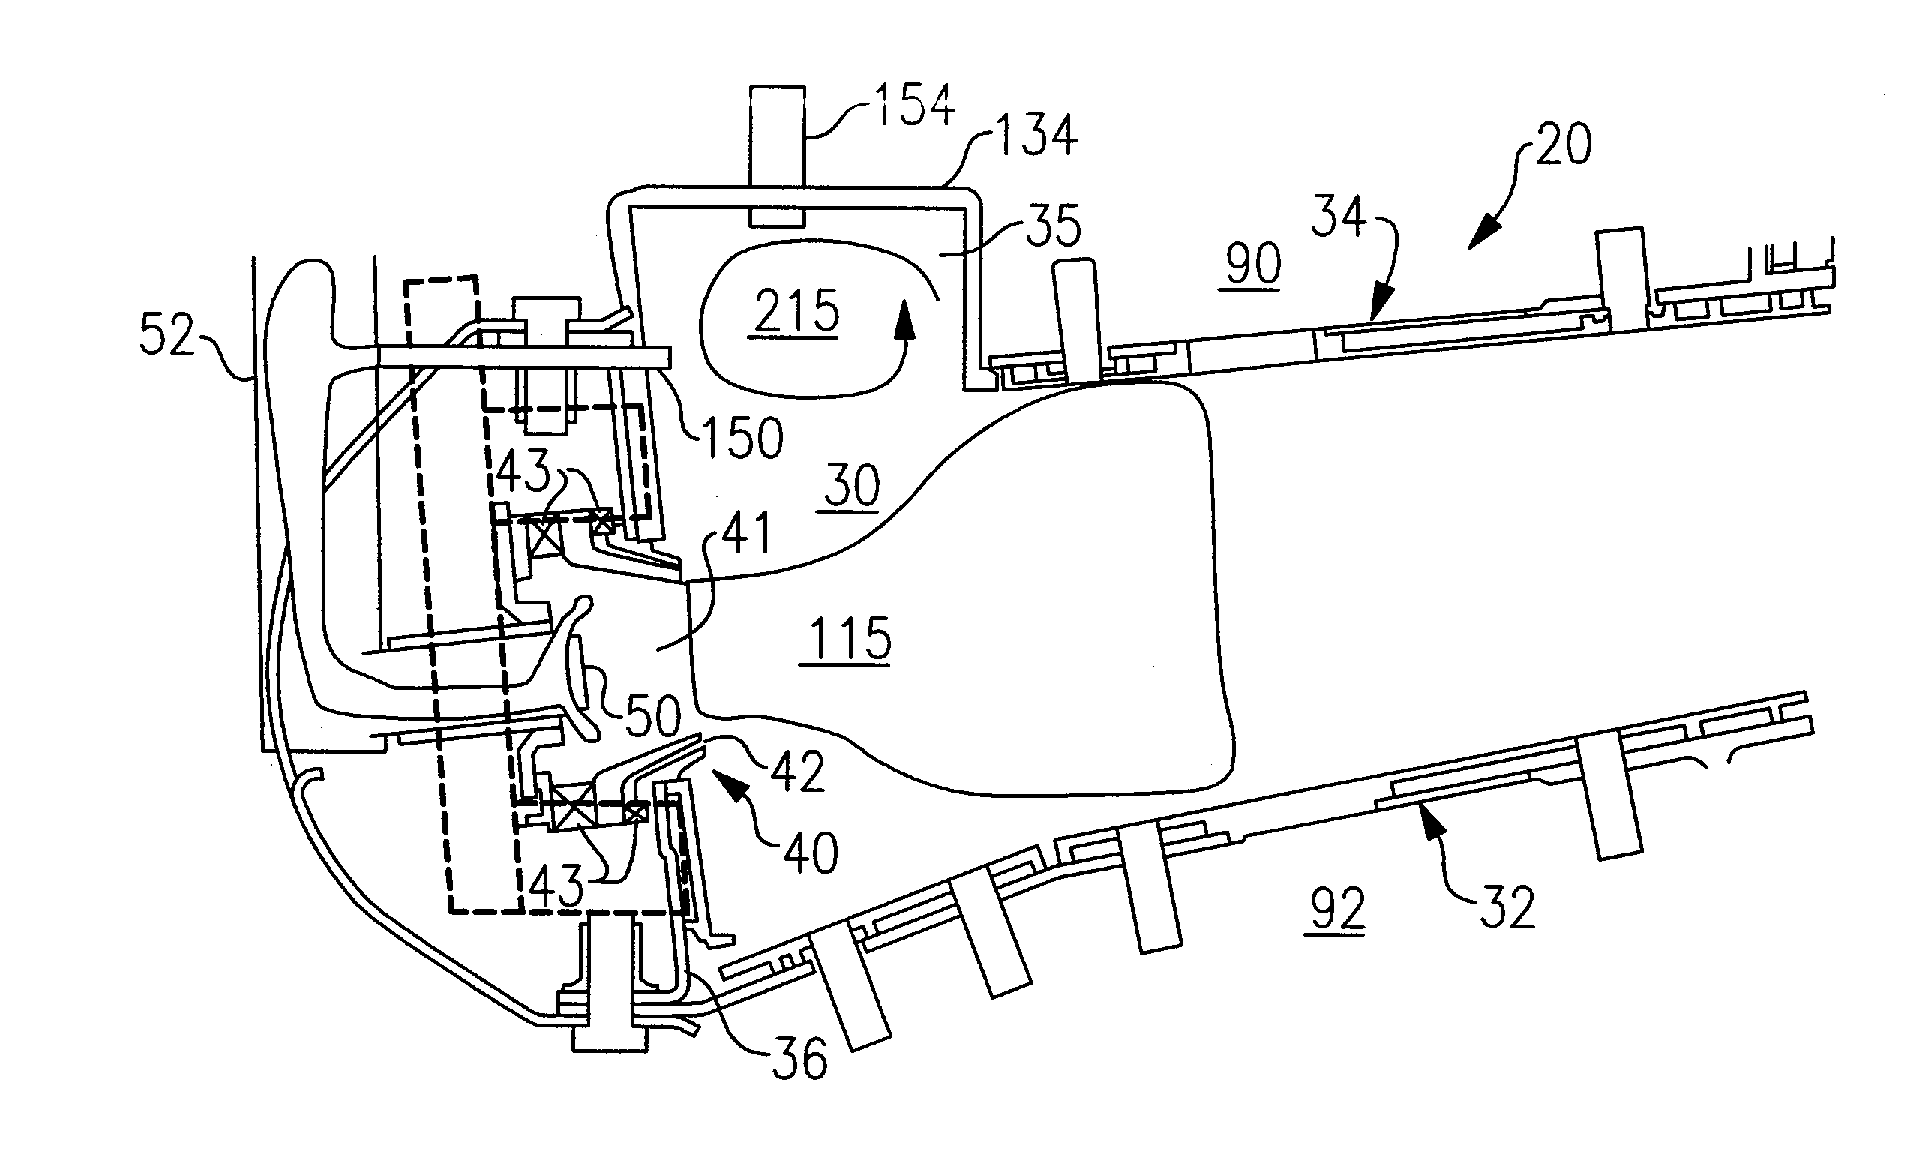 Gas turbine combustor with staged combustion